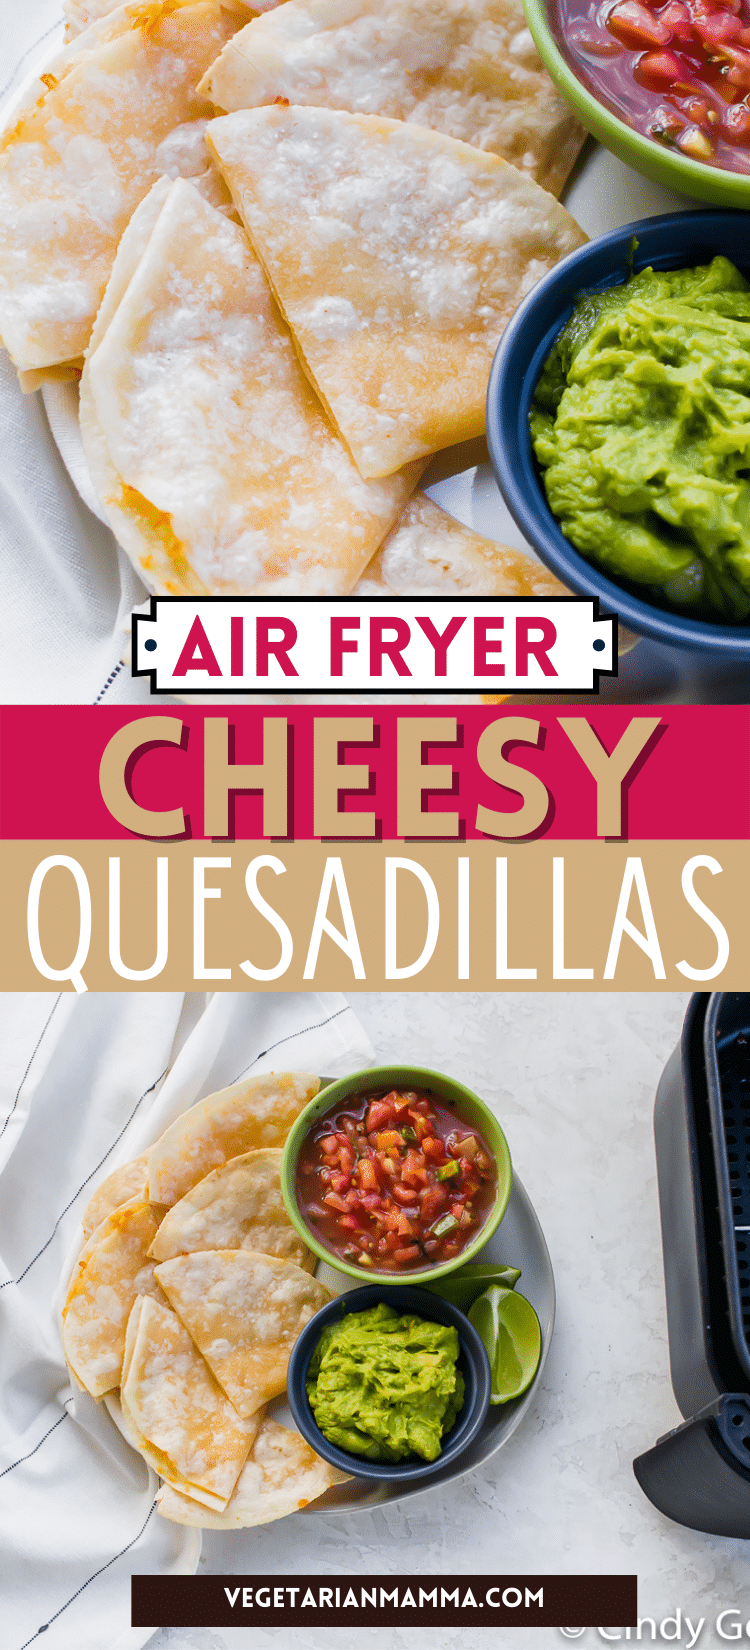 This air fryer quesadilla cooks up golden brown and crispy in less than 10 minutes, thanks to your air fryer! Add all the toppings you'd like to this air fryer quesadilla!